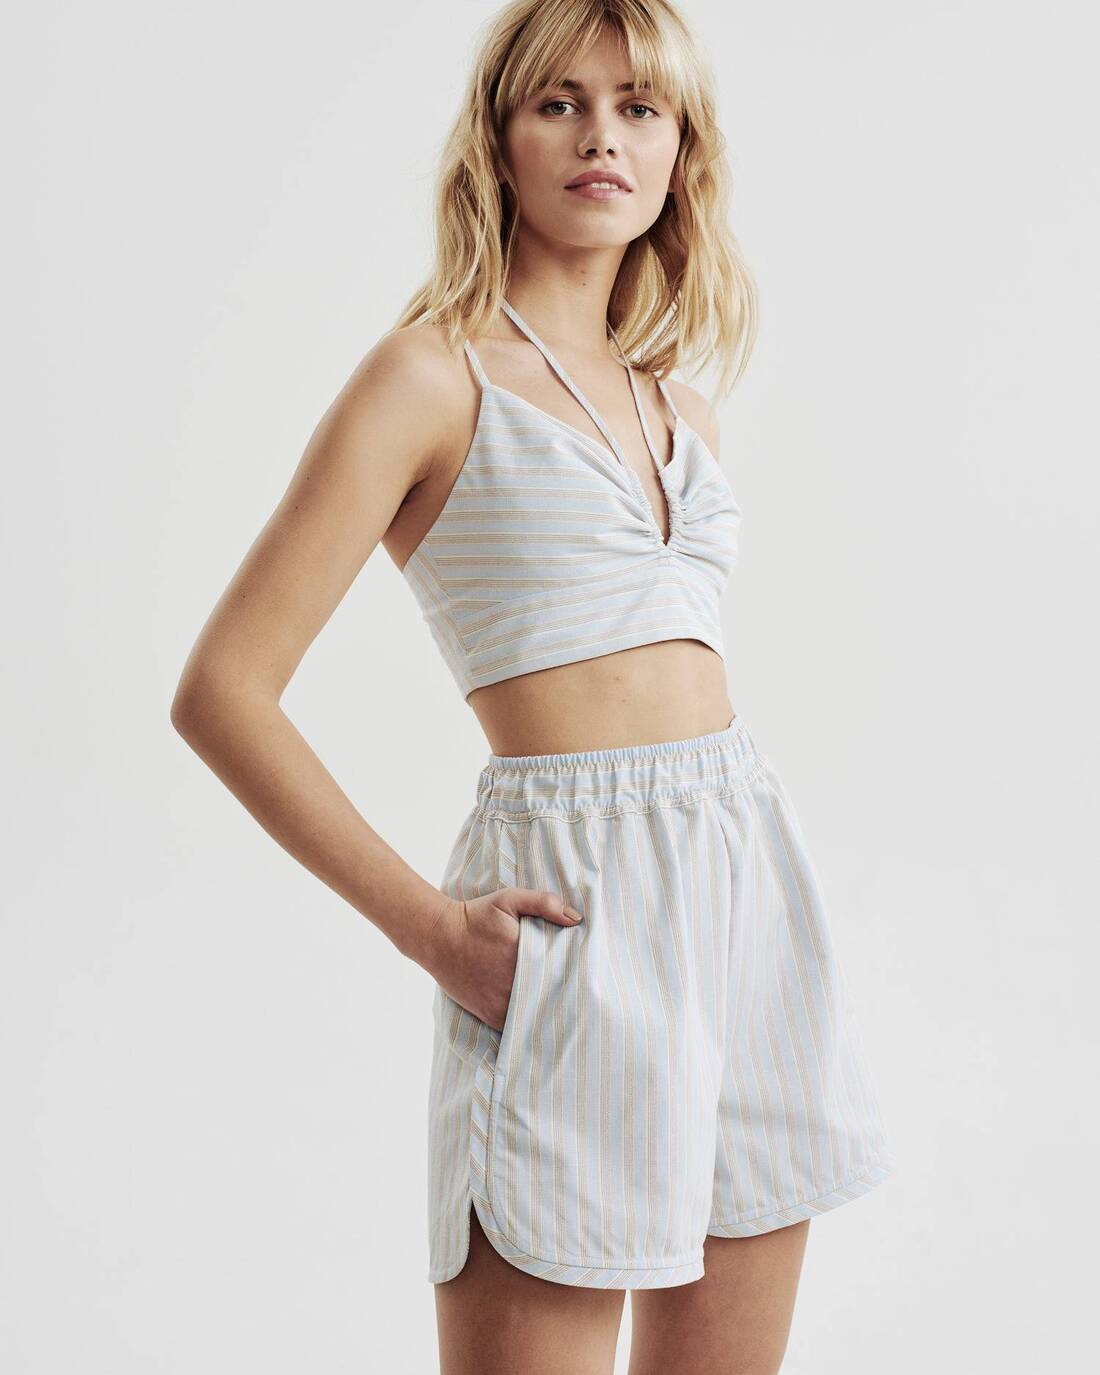 Striped top and shorts set